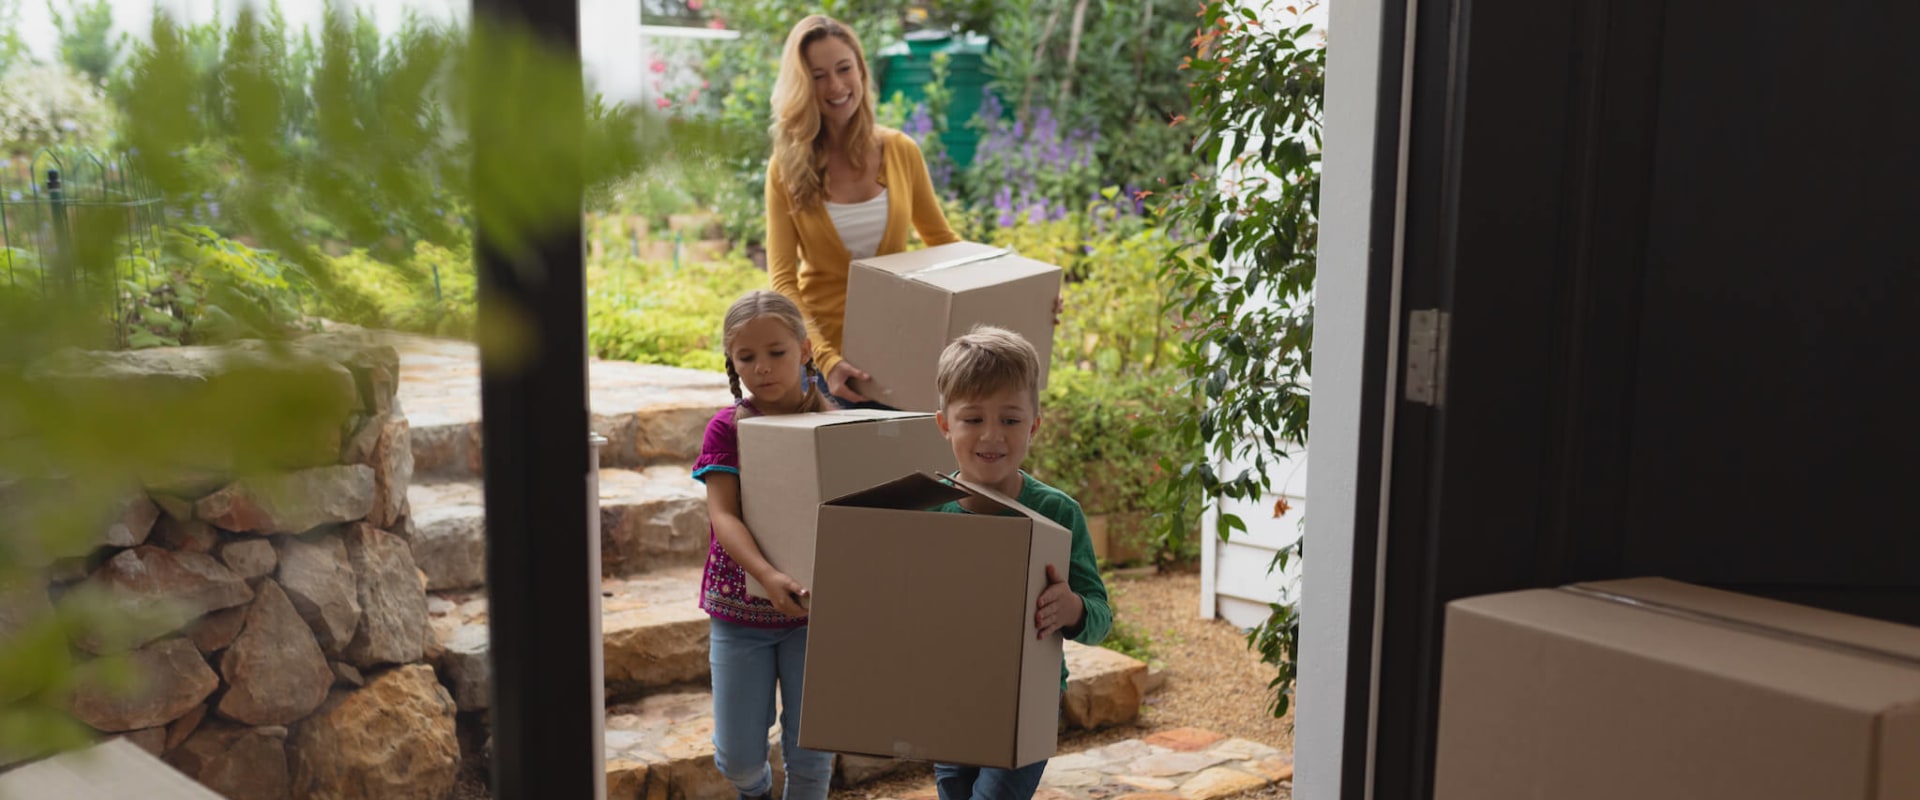 Exploring Child Relocation and Family Relocation Laws